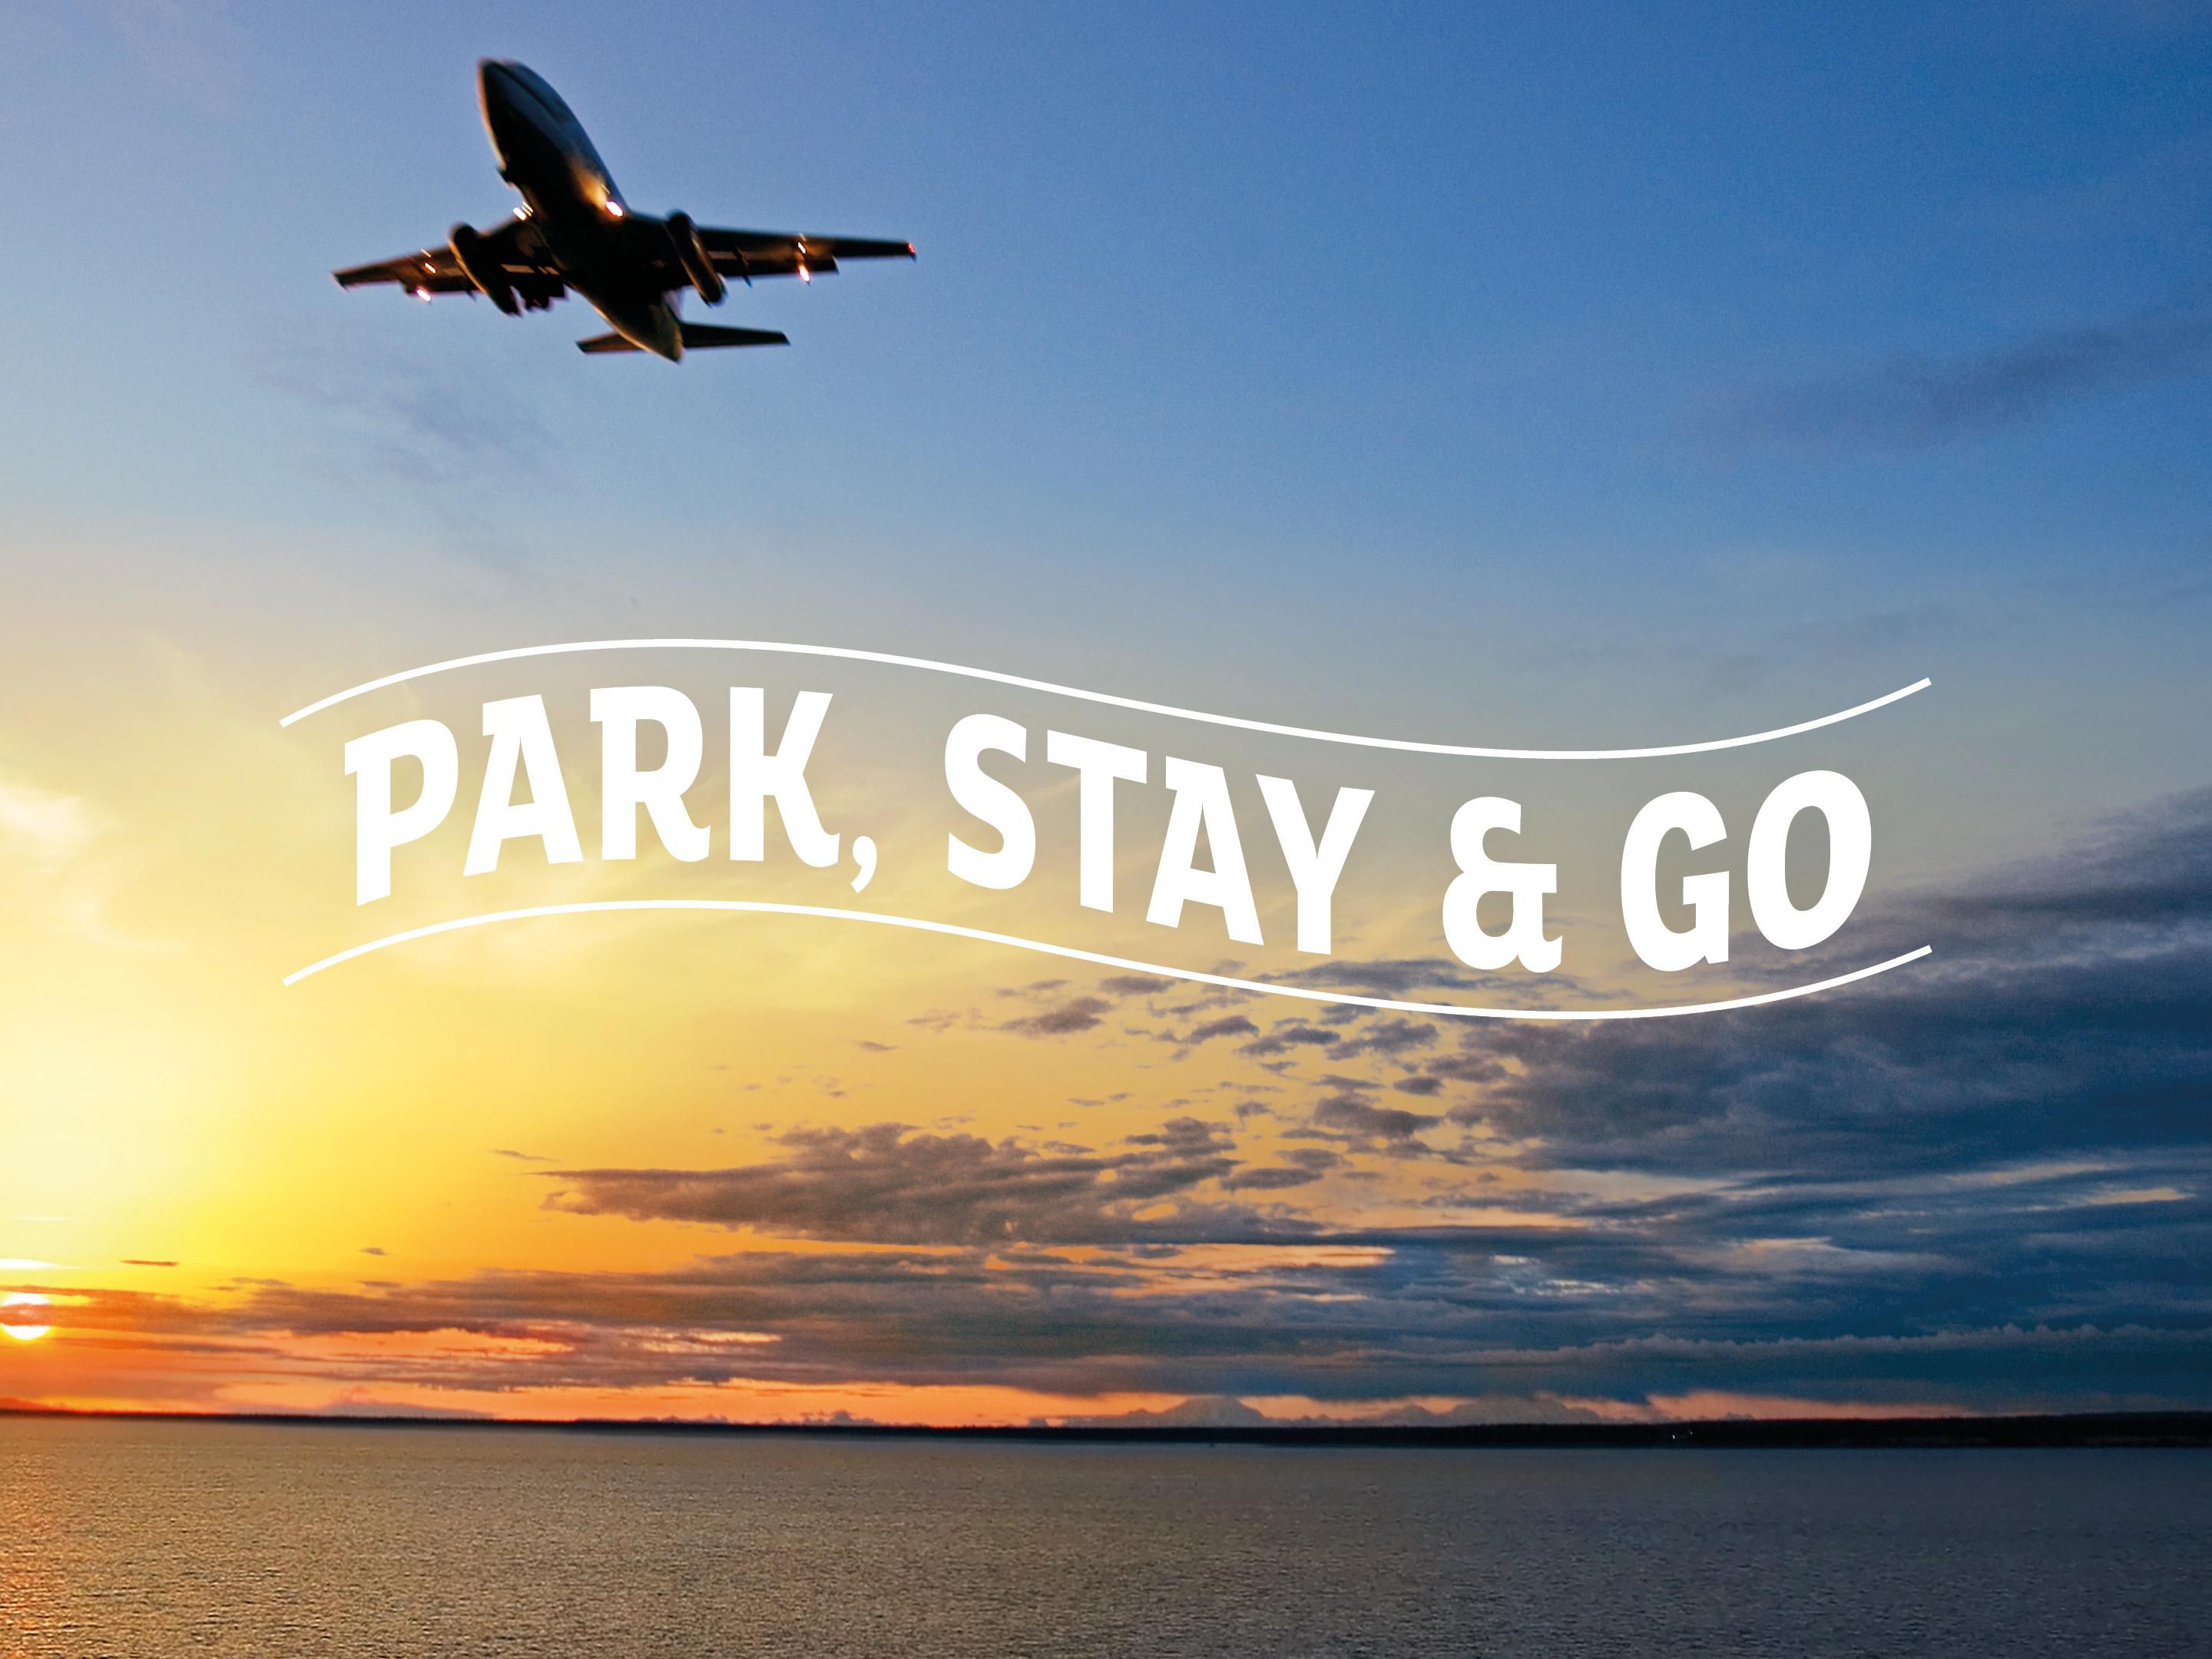 Park, Stay & Go